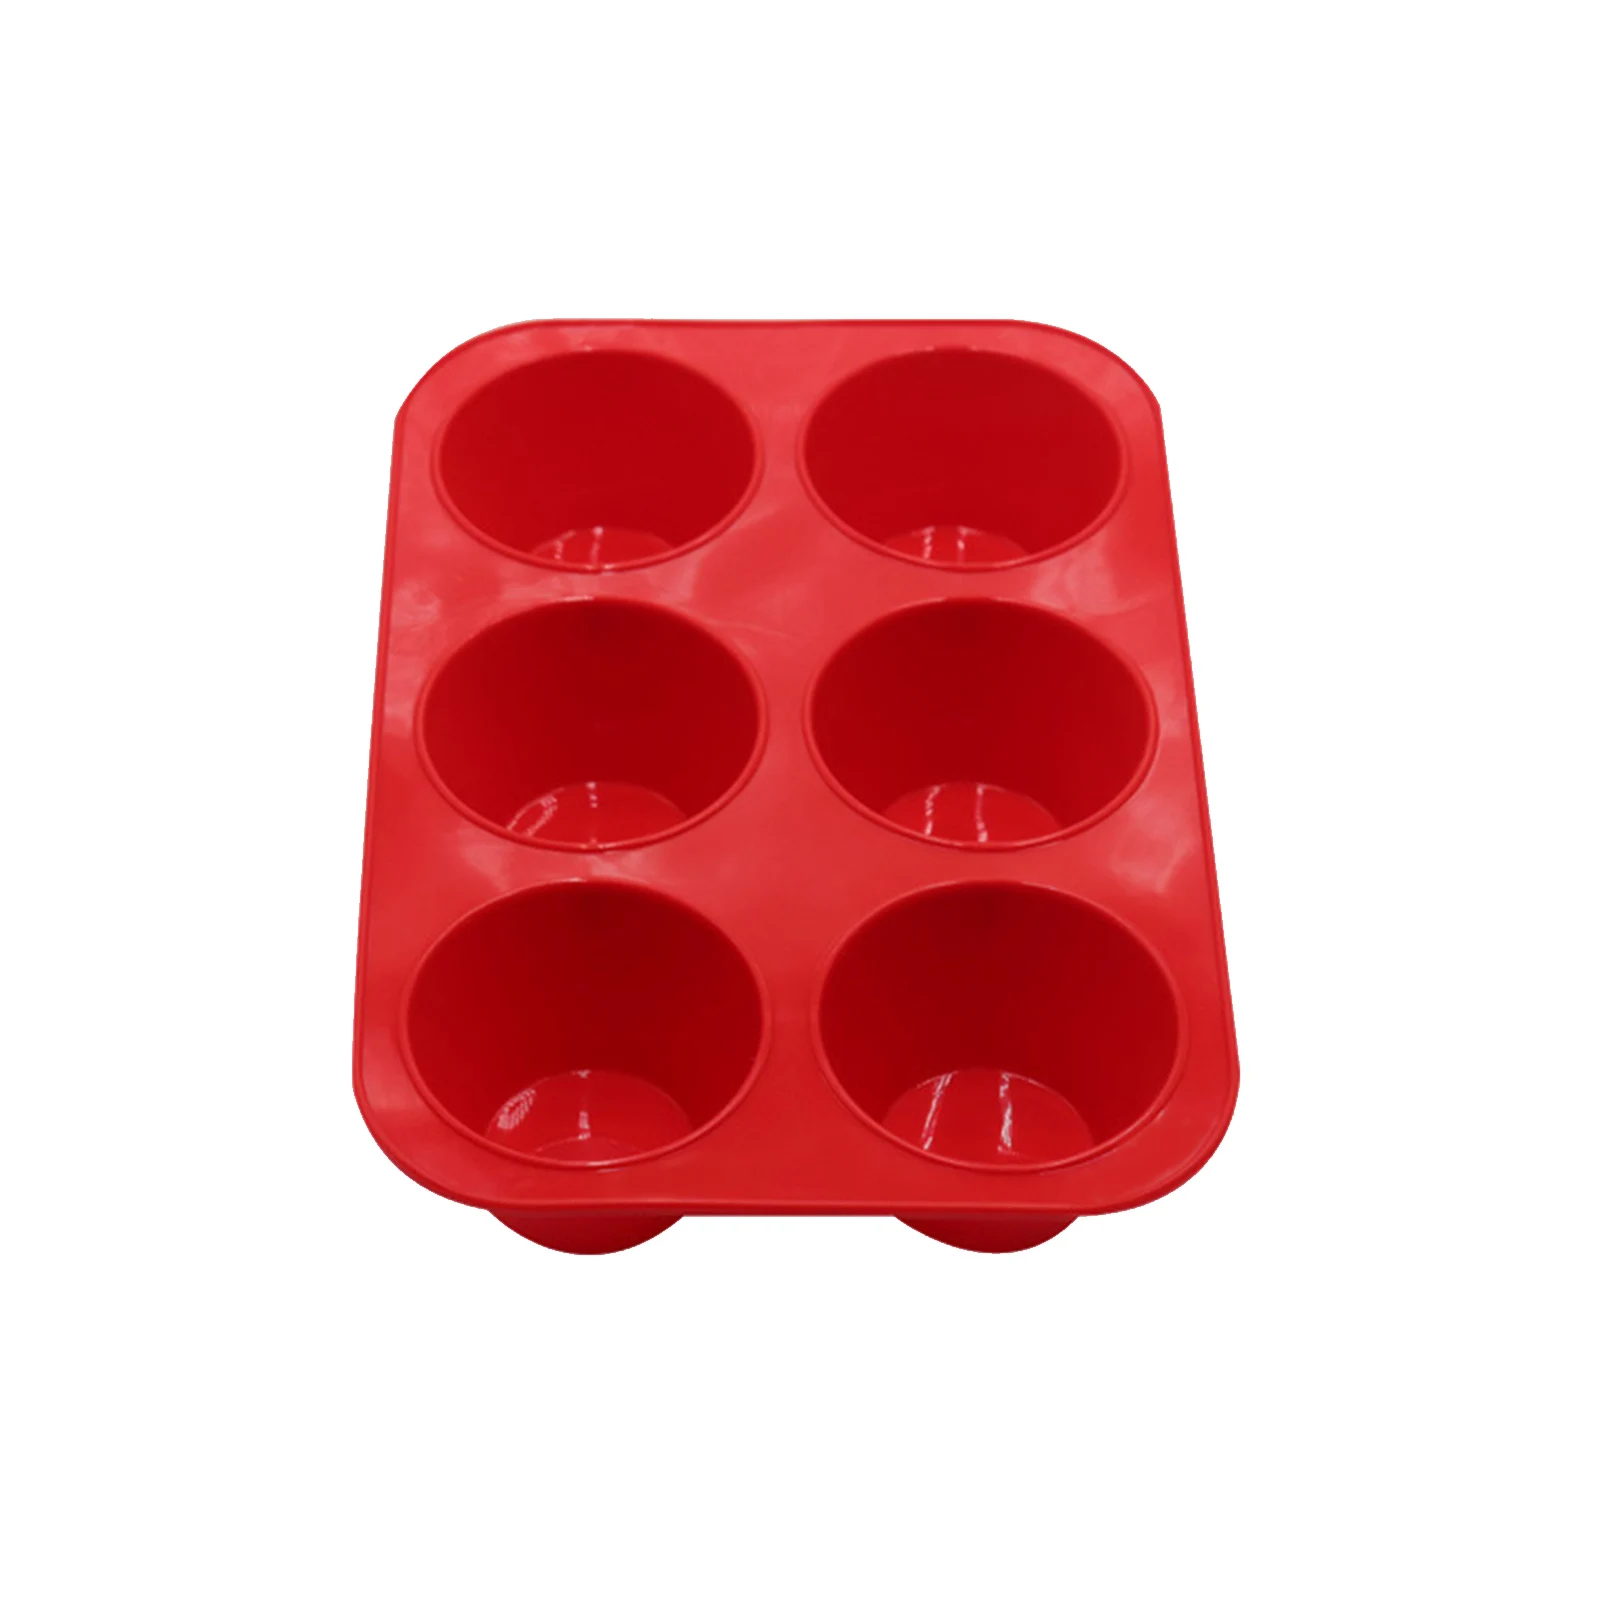 

Easy Clean Pudding Yorkshire DIY Muffin Tray Bakeware Silicone Mold For Baking Non Stick Kitchen Cupcake Tin Tool 6 Cup Deep